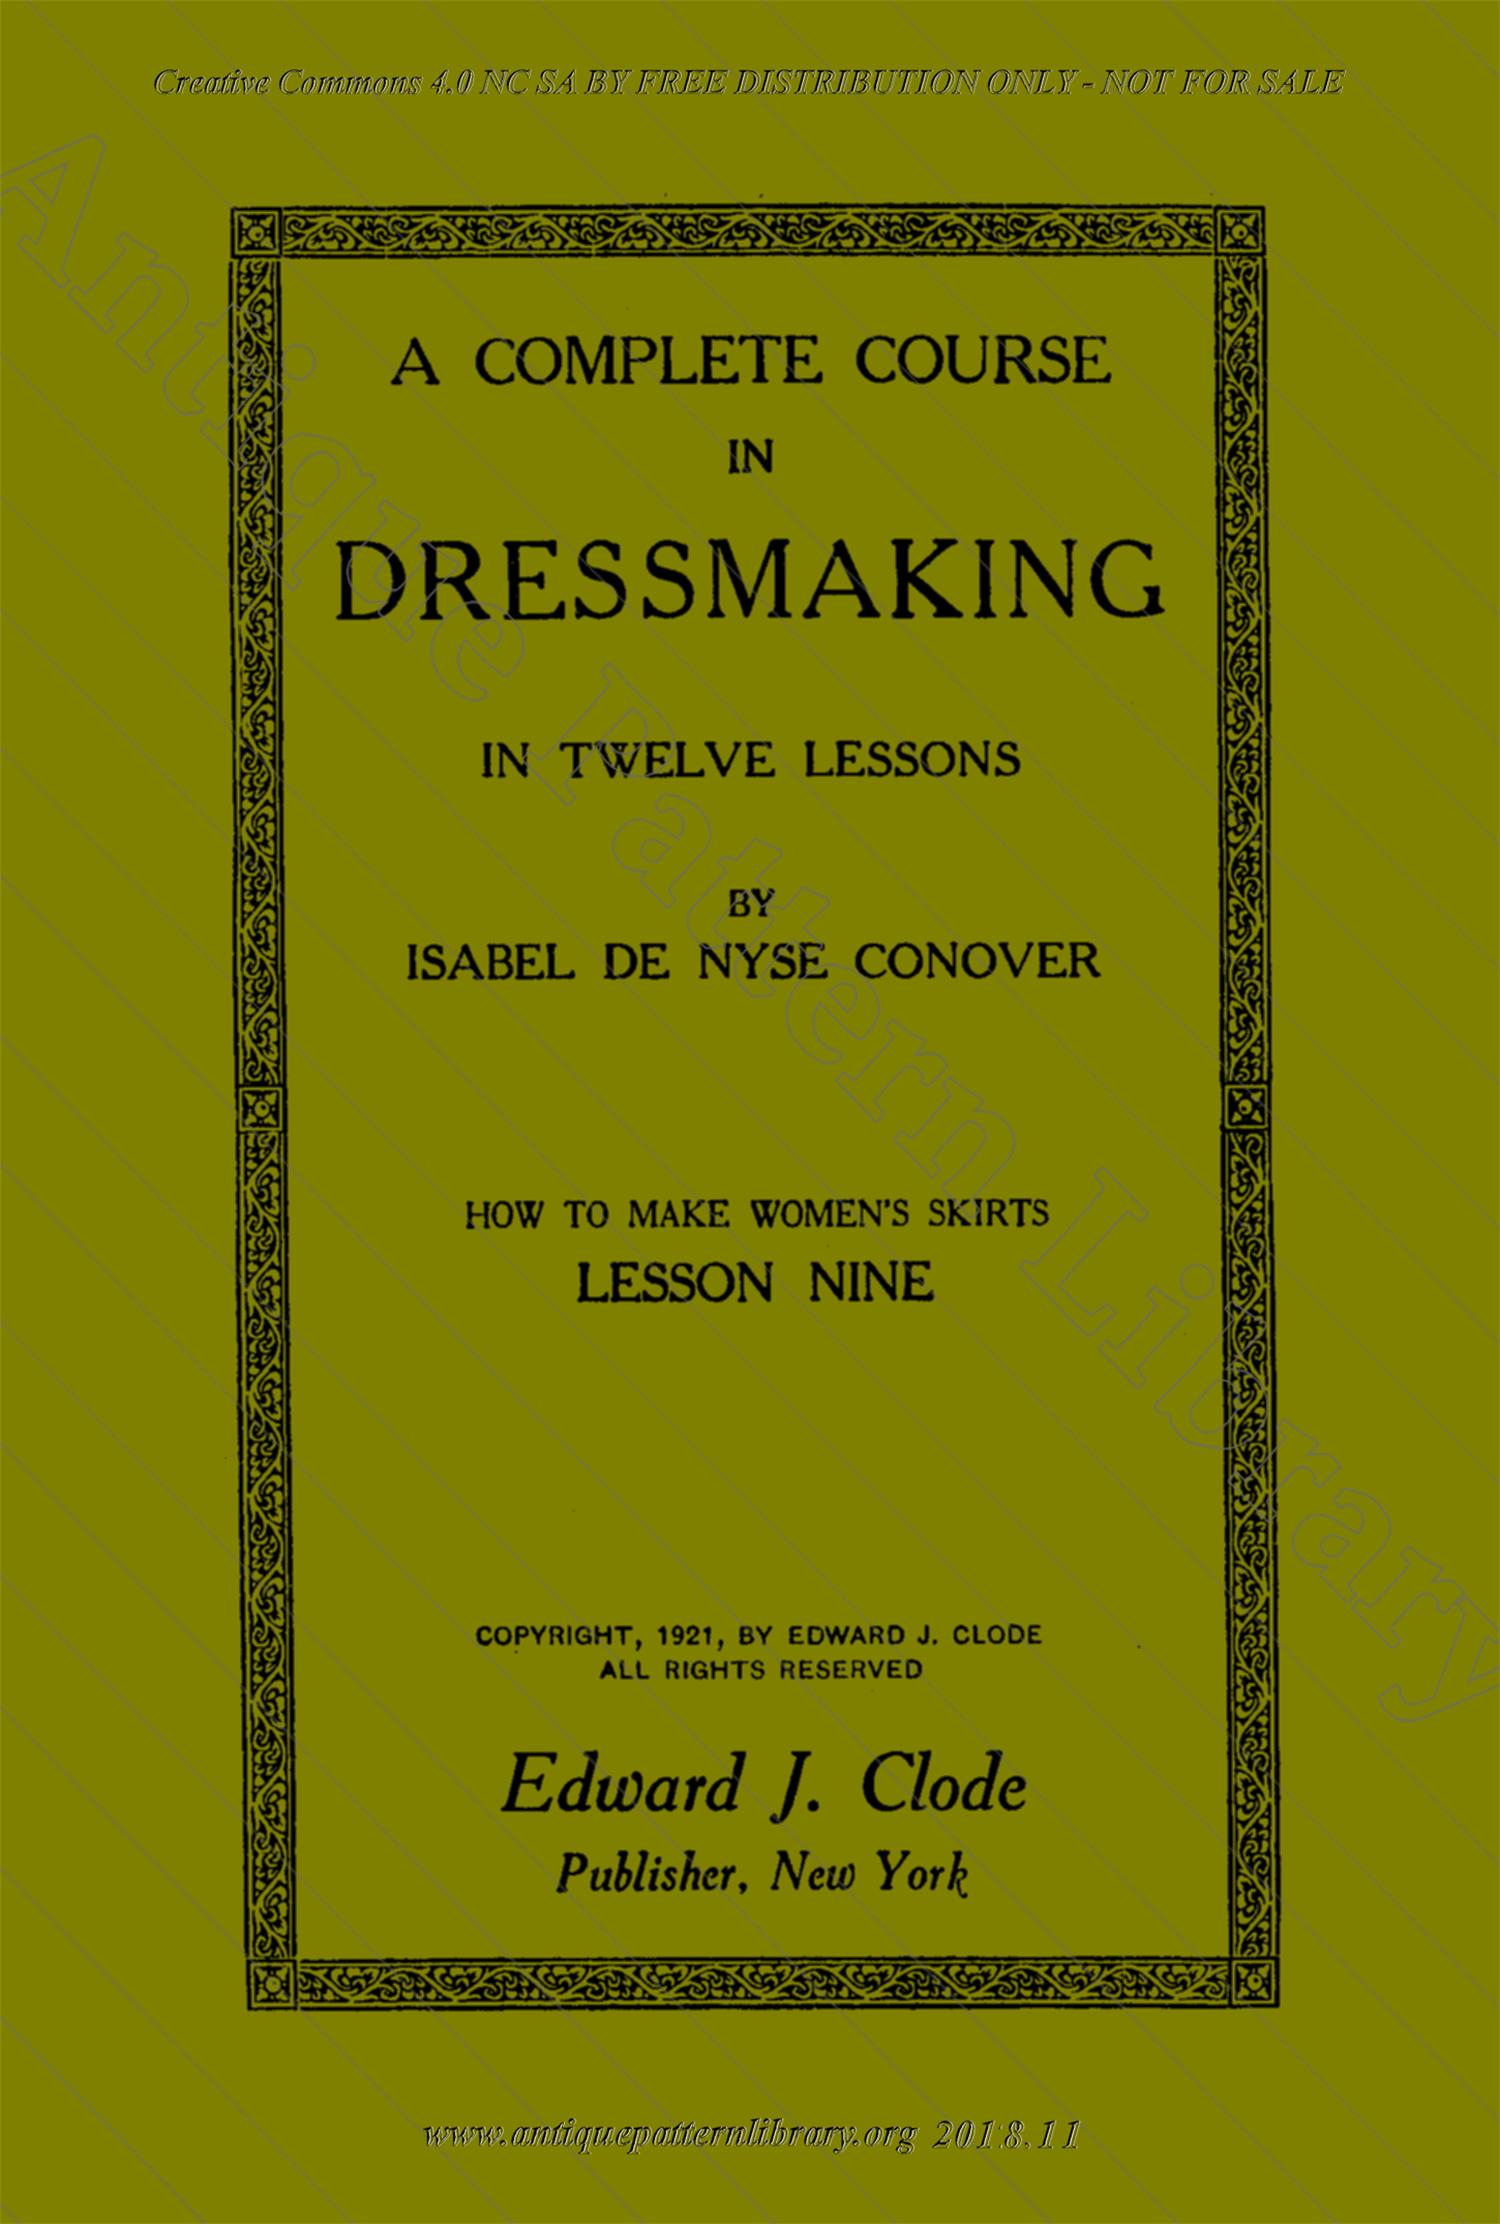 B-YS104 Complete Course in Dressmaking in Twelve Lessons: